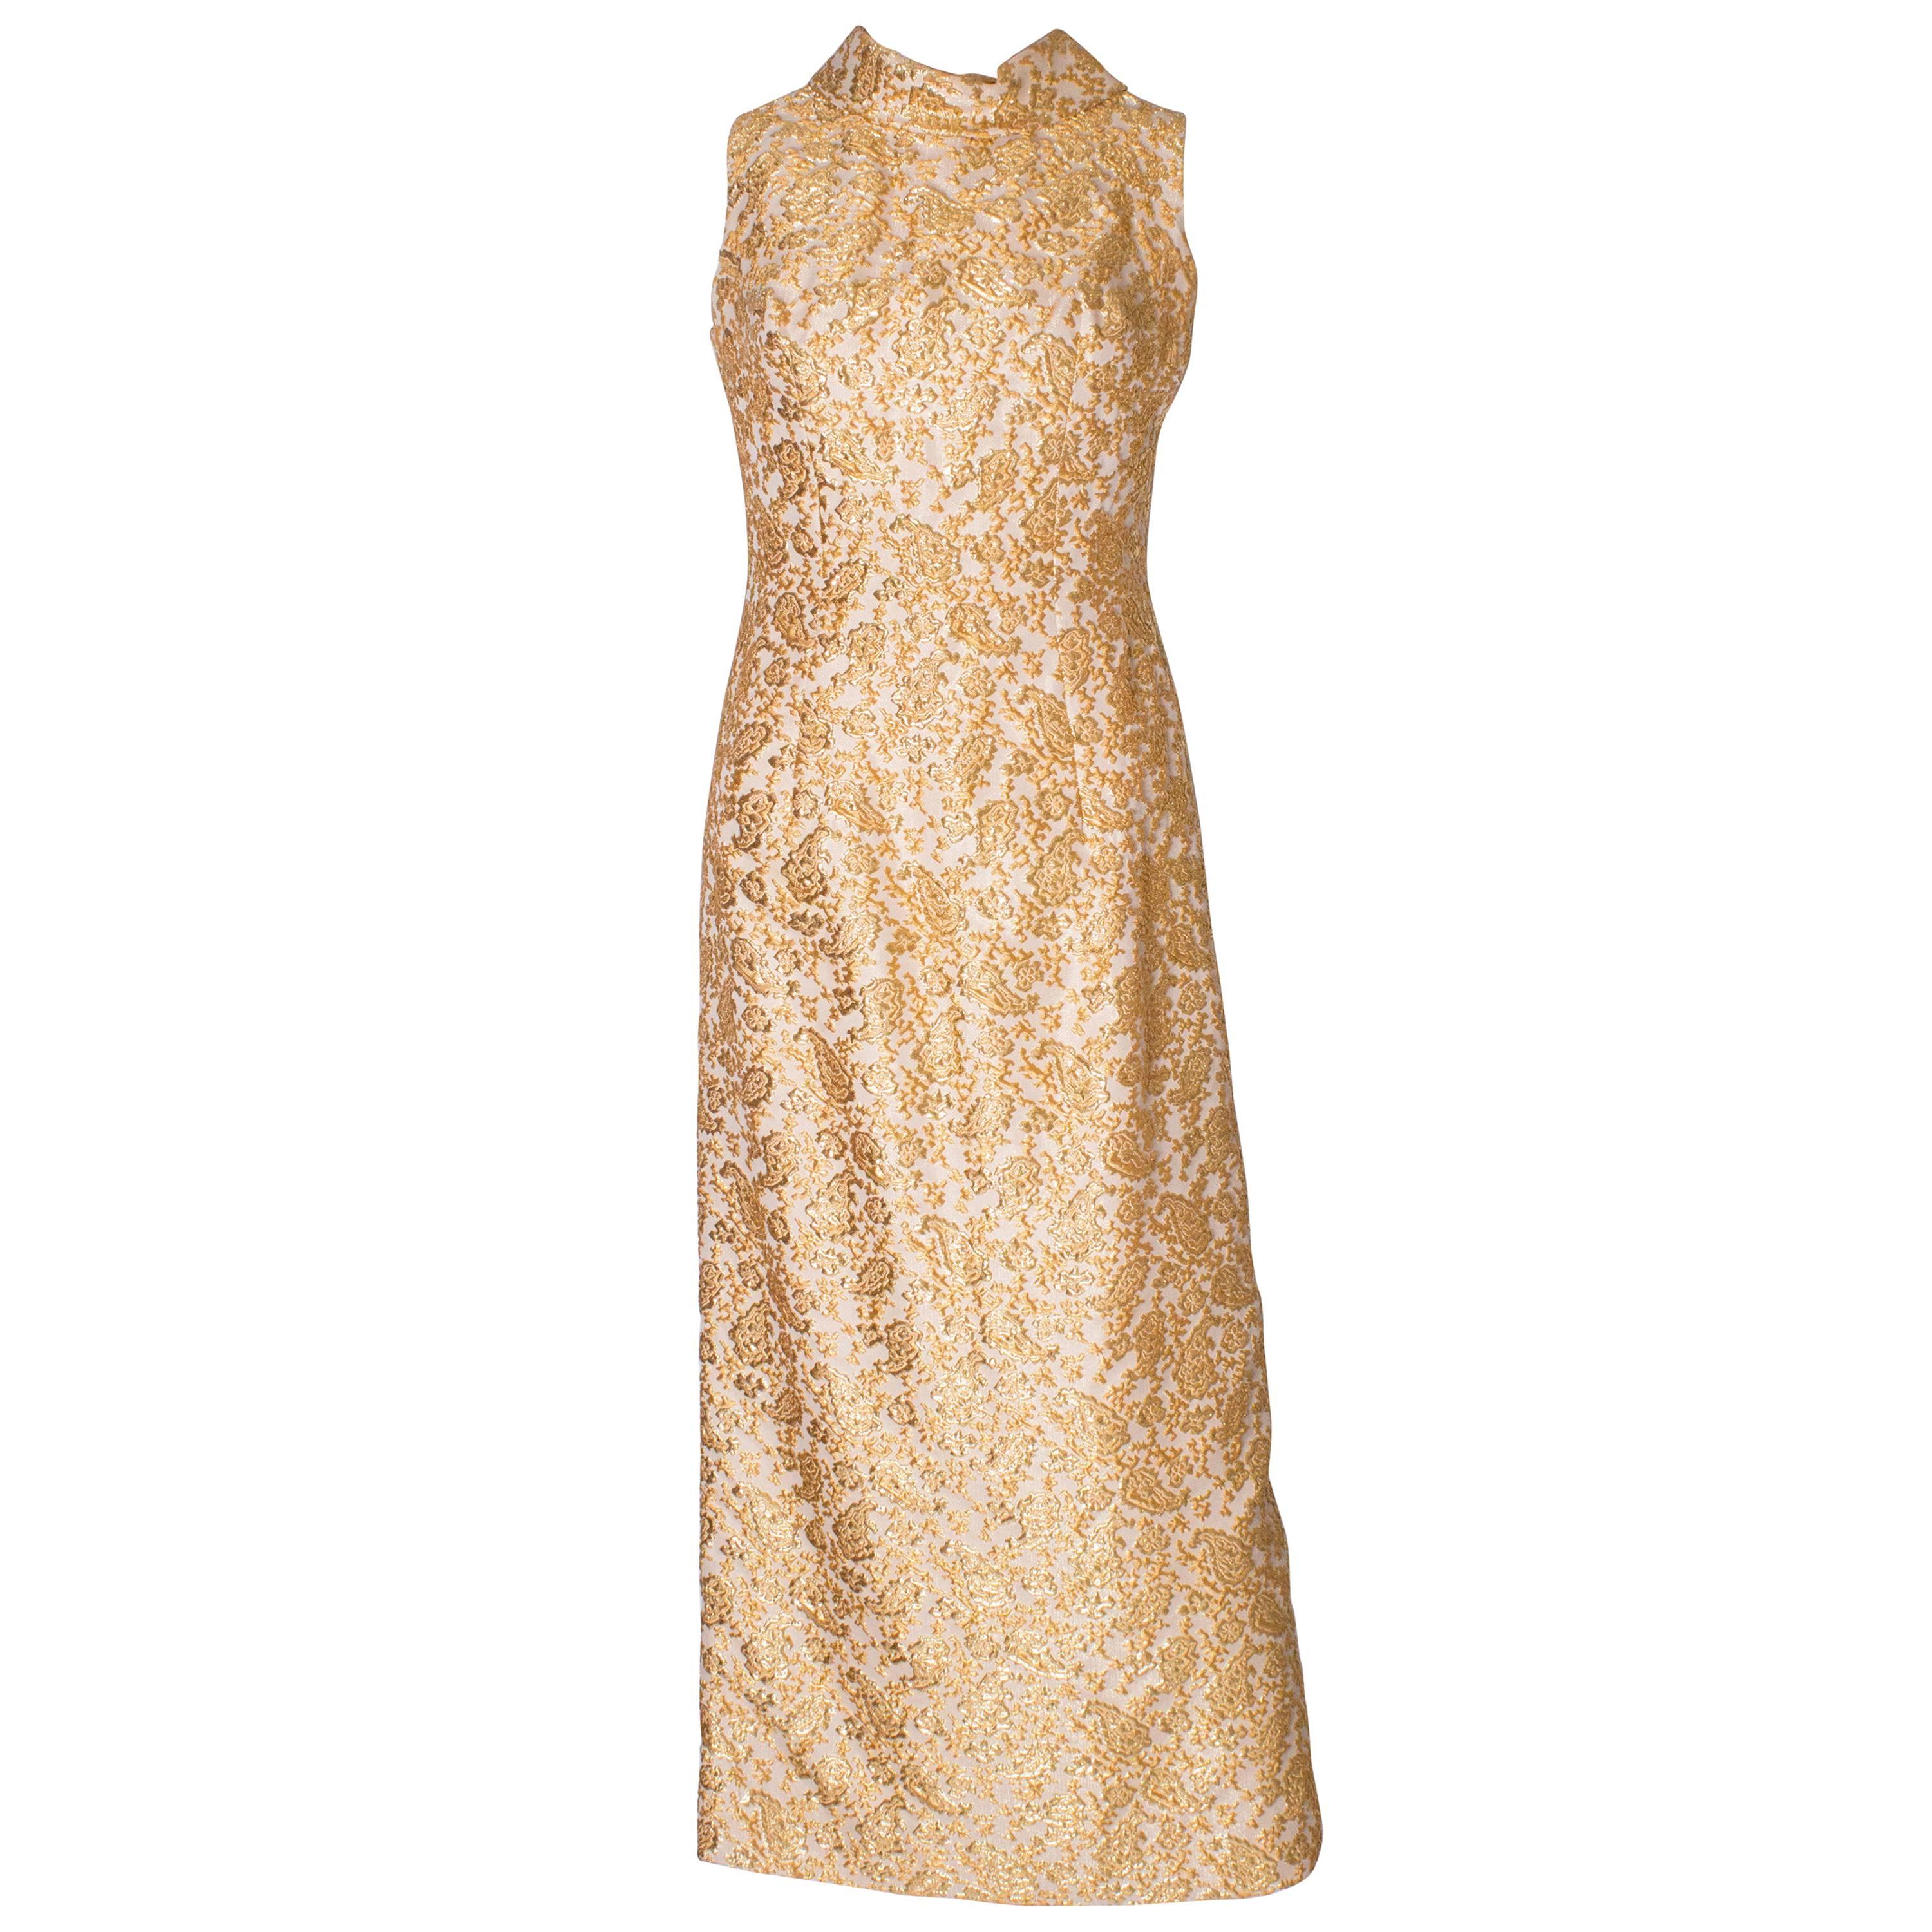 A Vintage 1960s Gold brocade high neck Evening Gown